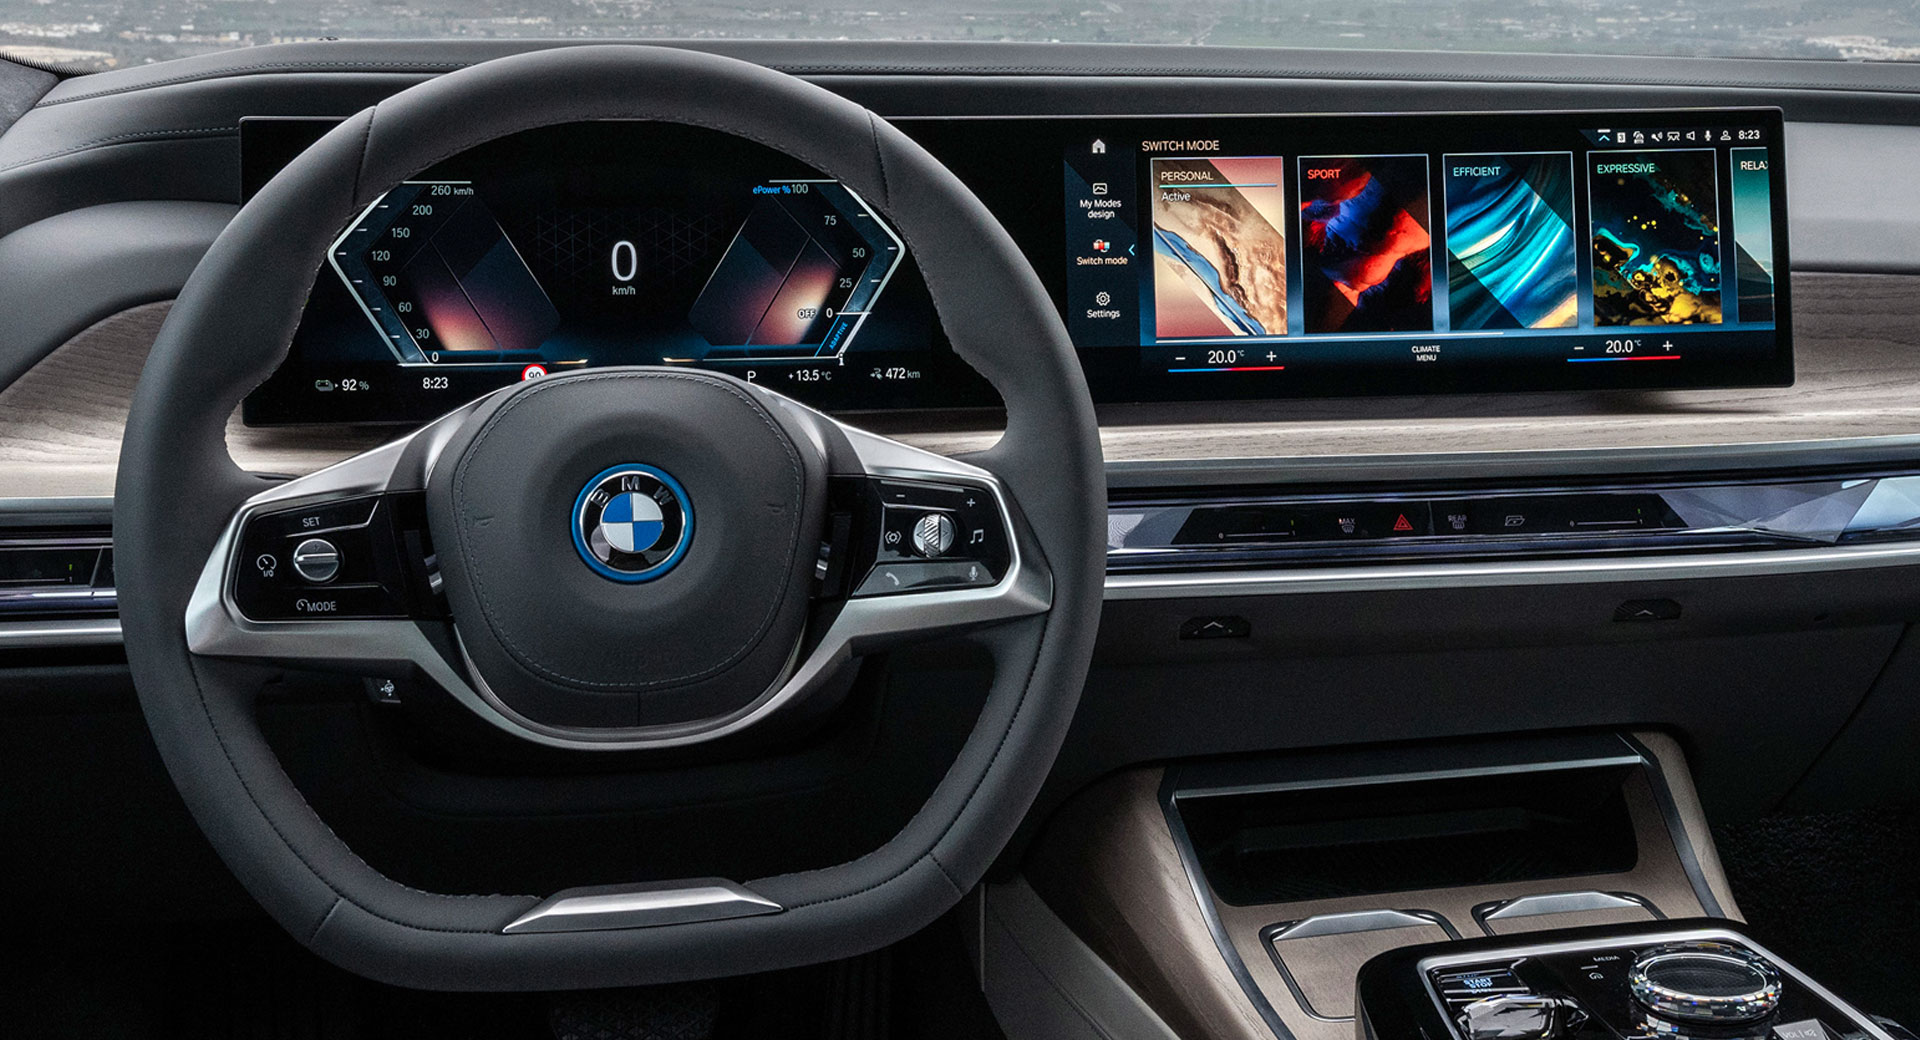 5 Smart tips for using Android Auto in your BMW